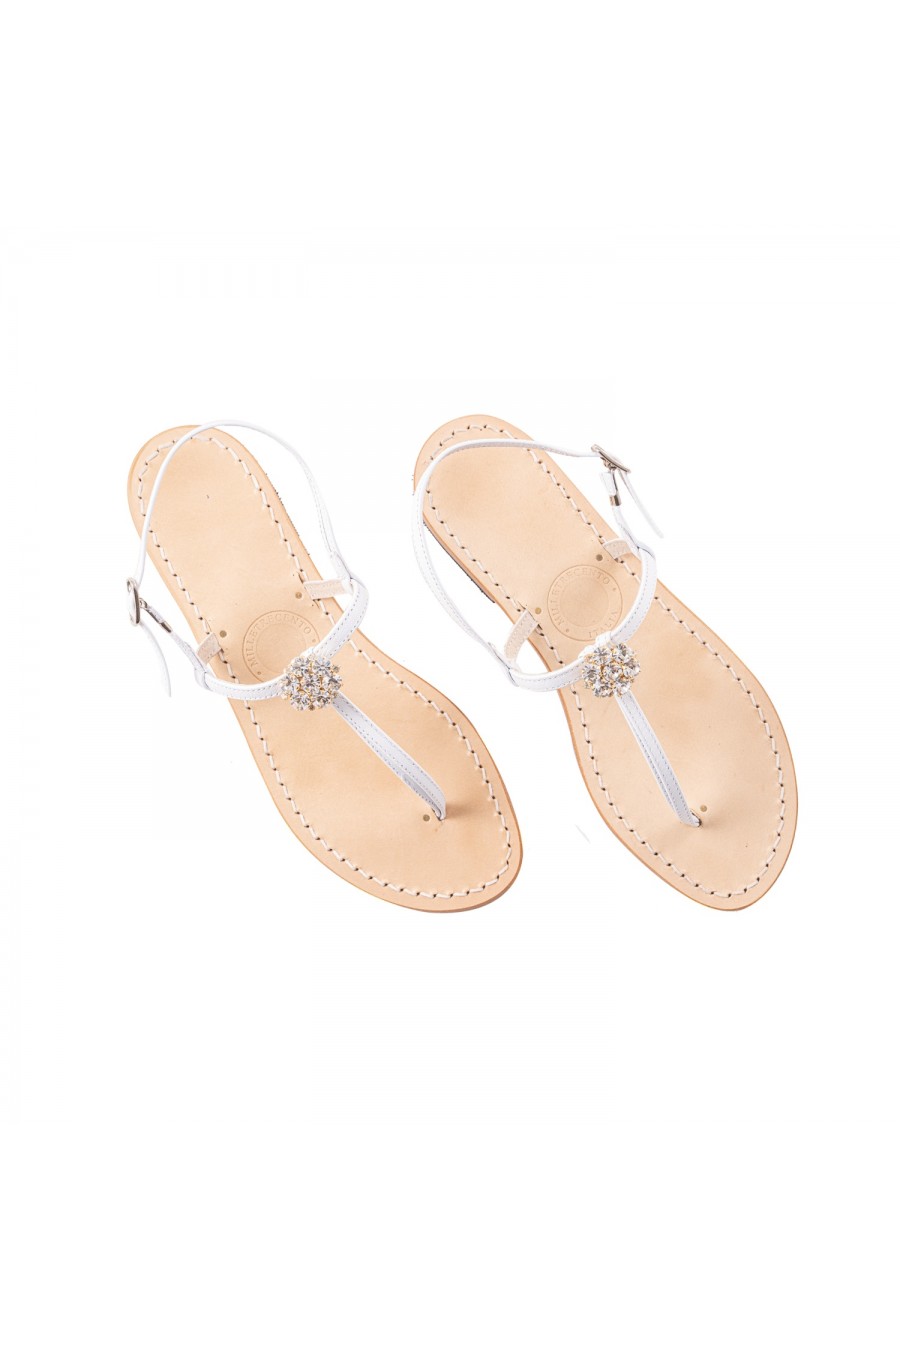 Cinque Terre Handmade Jewelled leather sandals